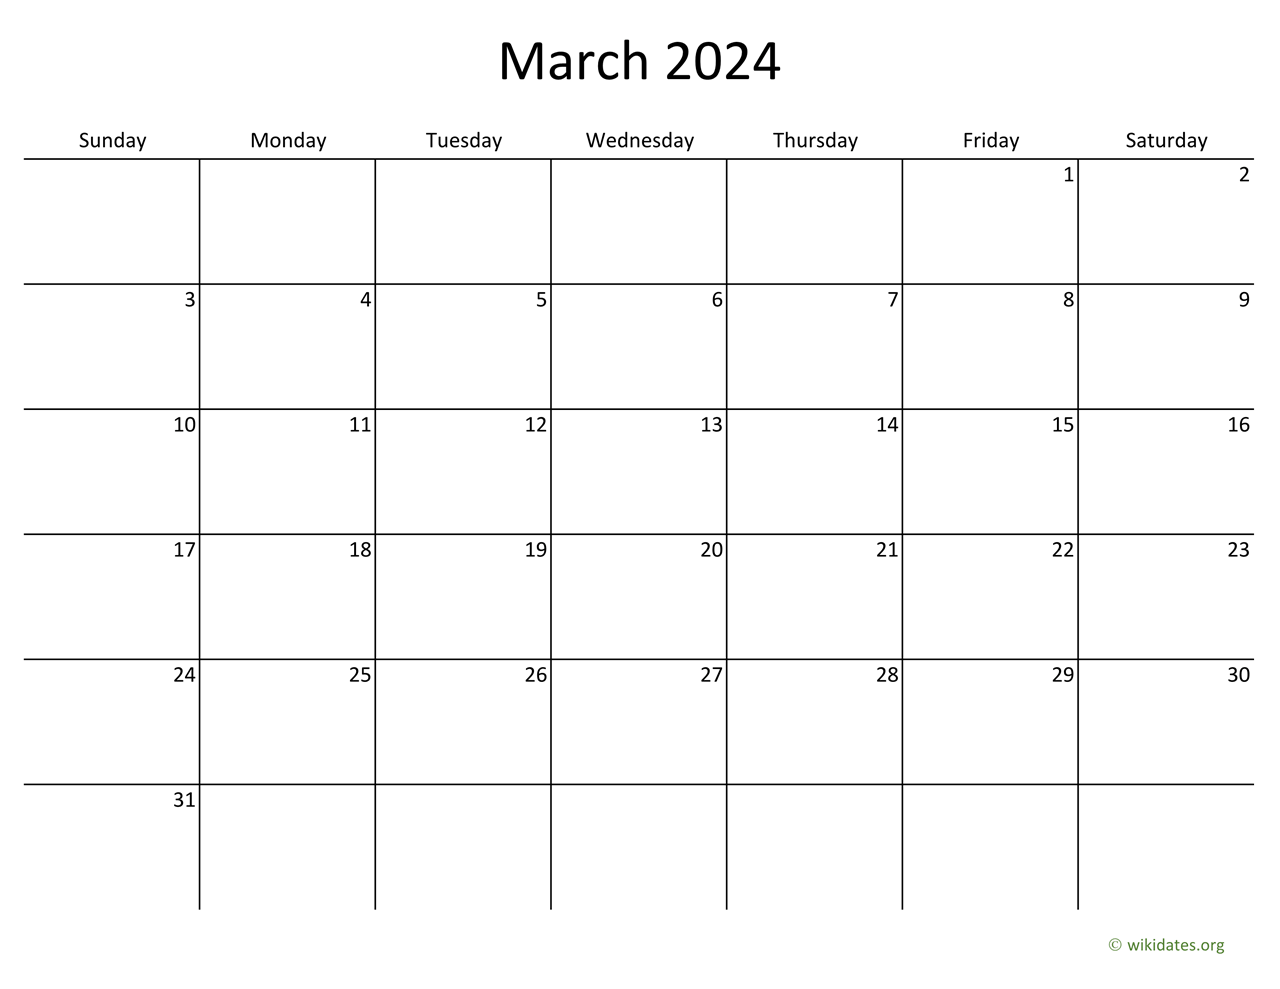 March 2024 Calendar with Bigger boxes | WikiDates.org